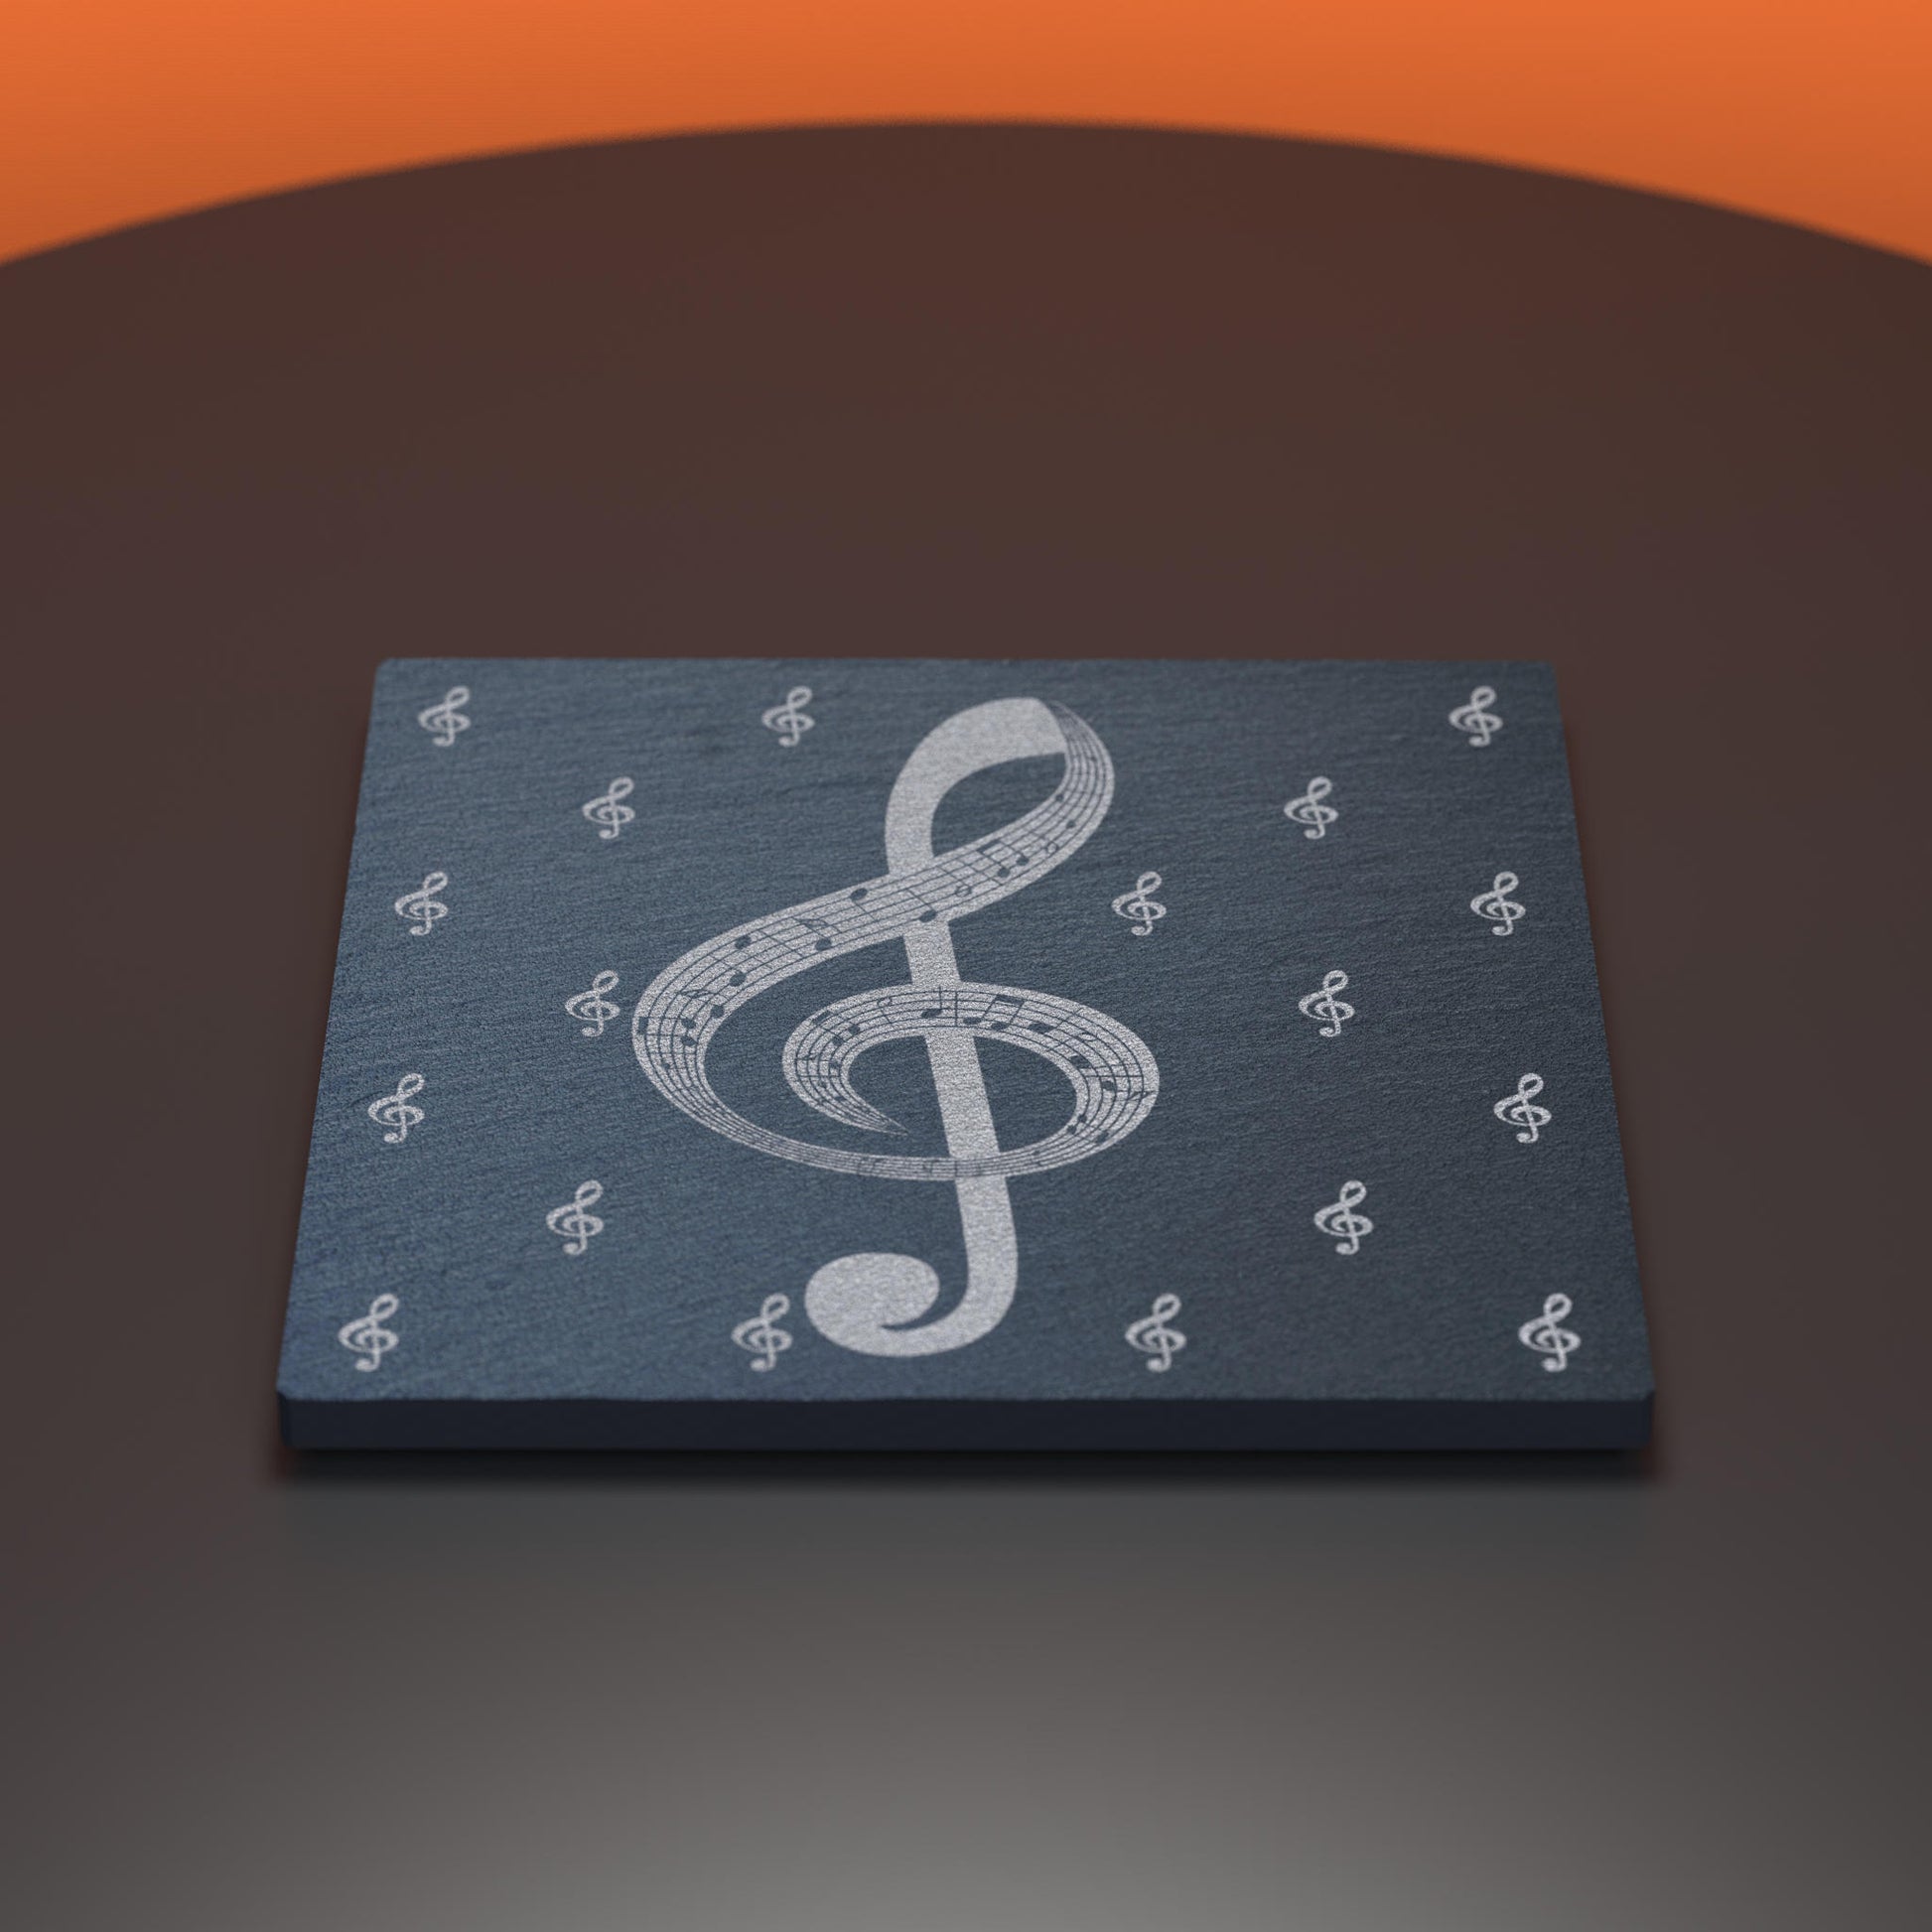 Slate coaster engraved with treble clefs